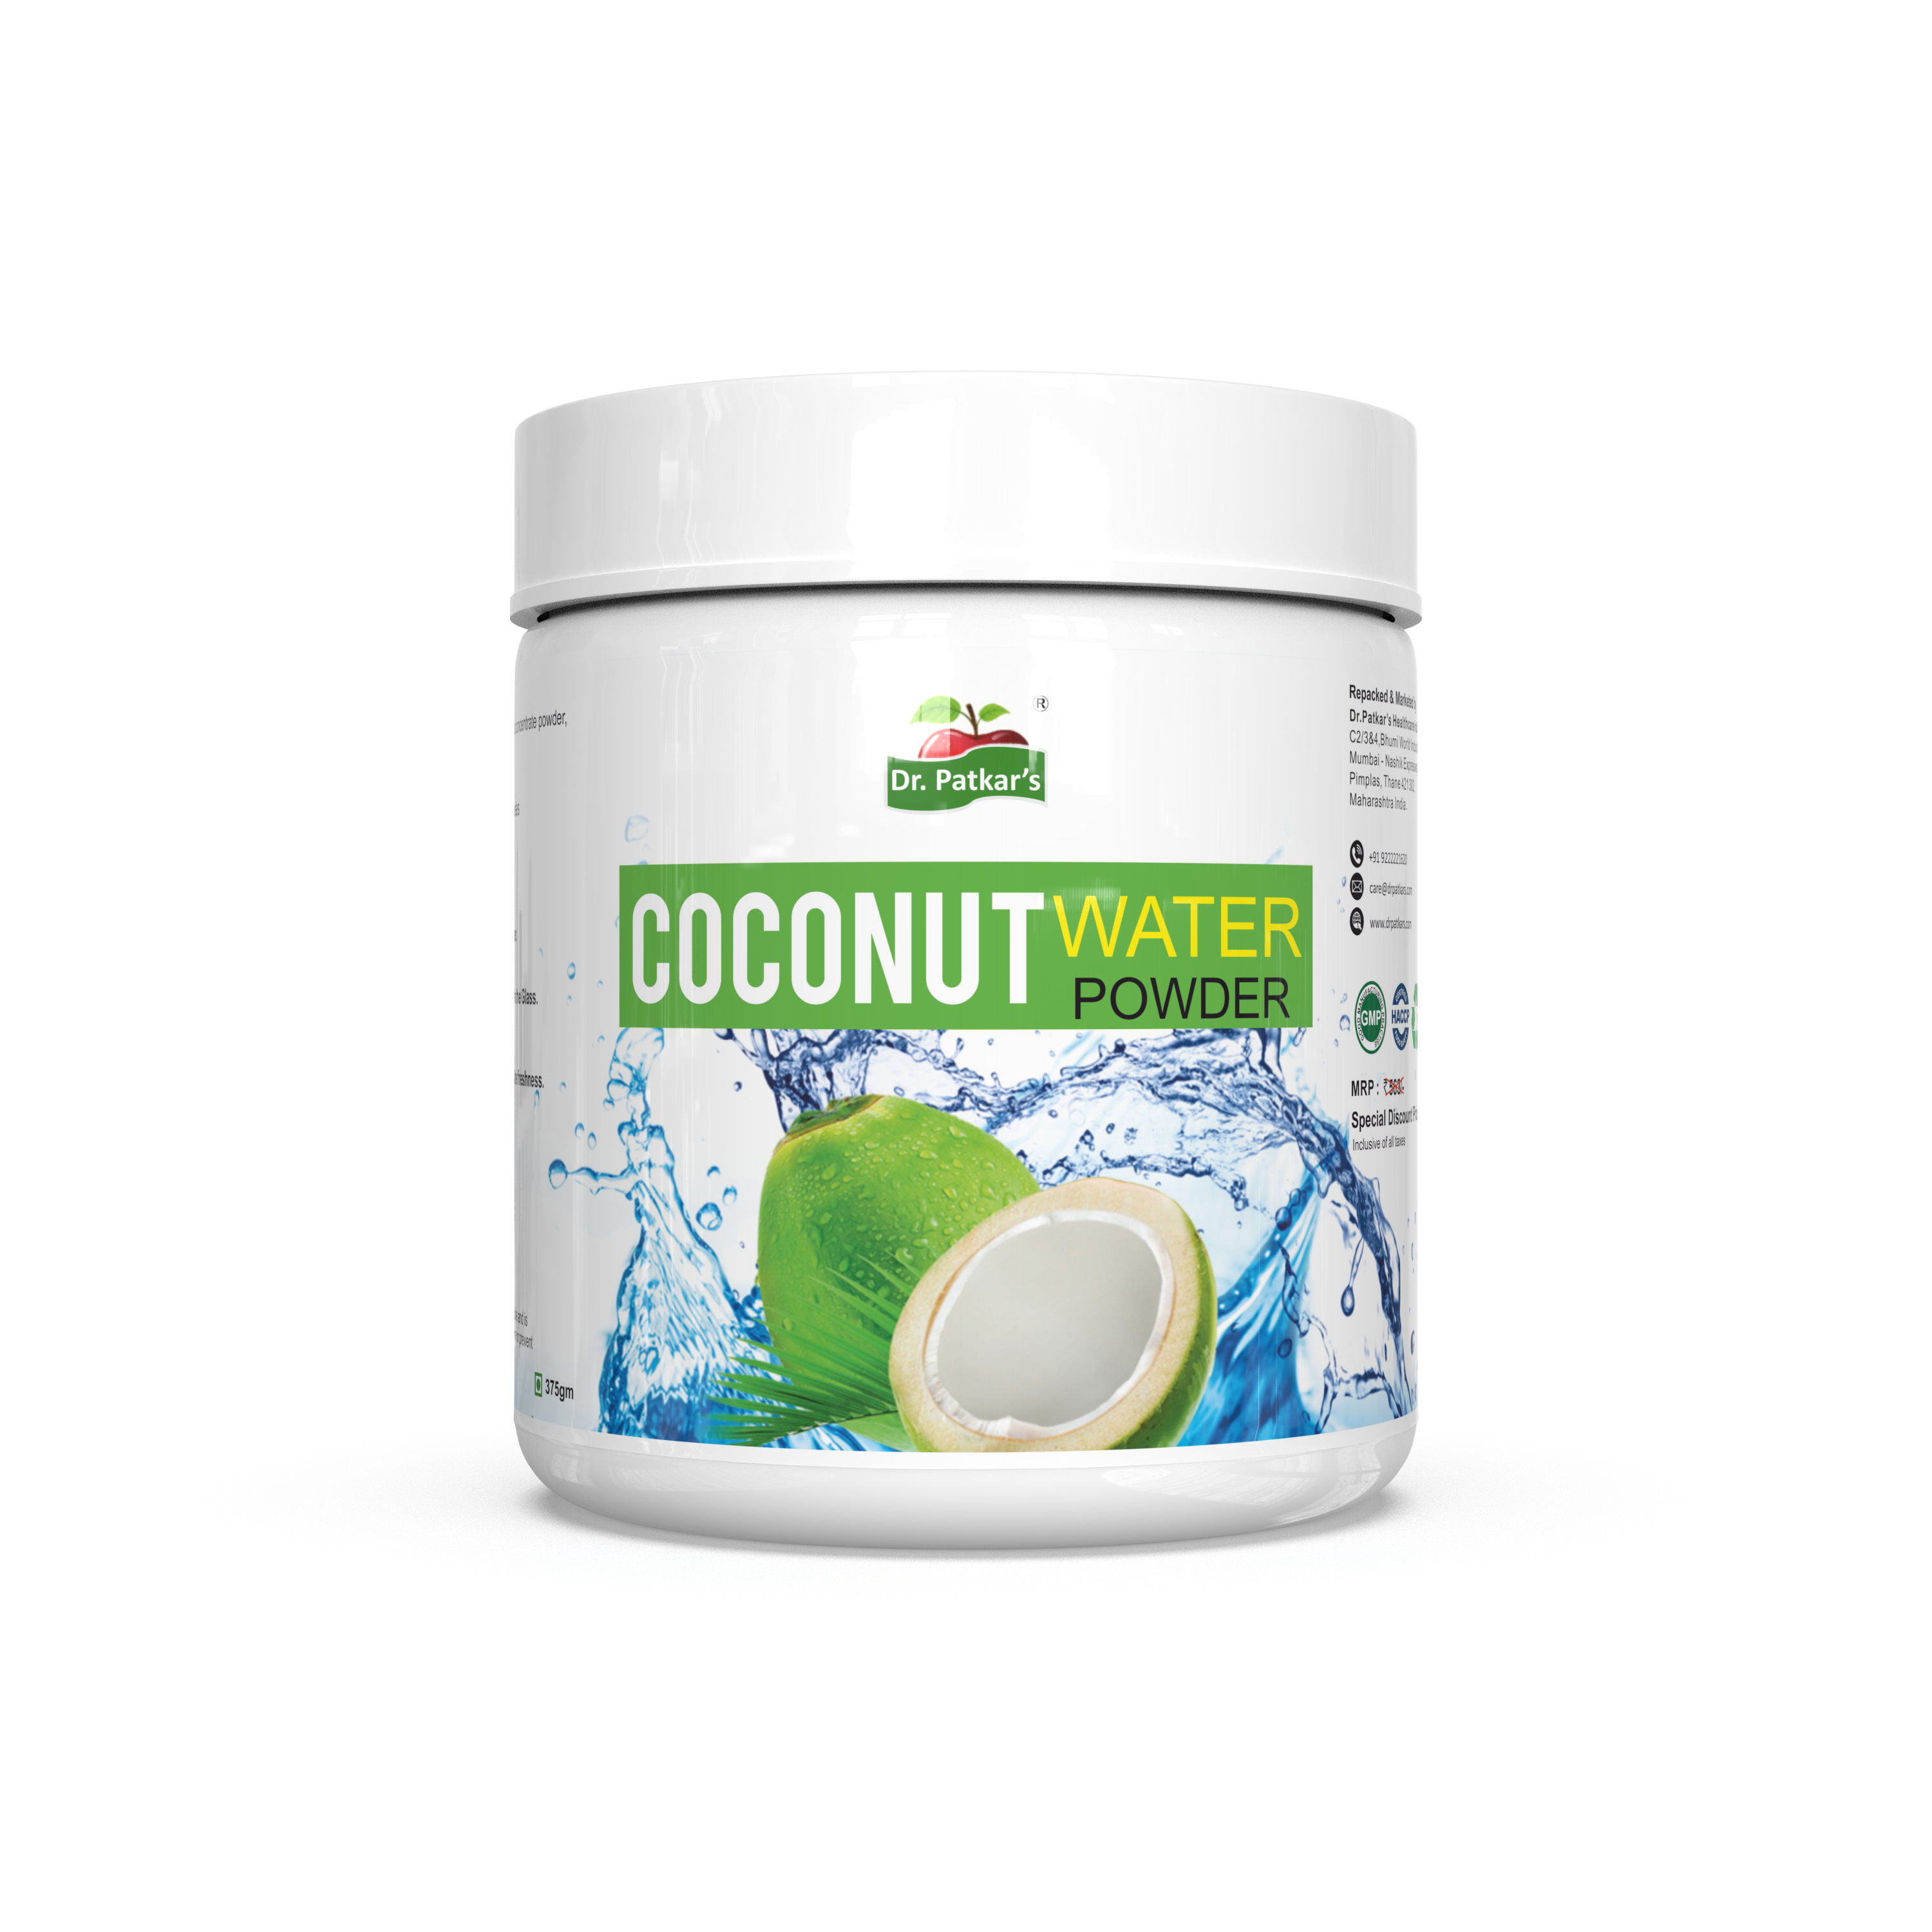 Buy Dr. Patkar's Coconut Water Powder at Best Price Online